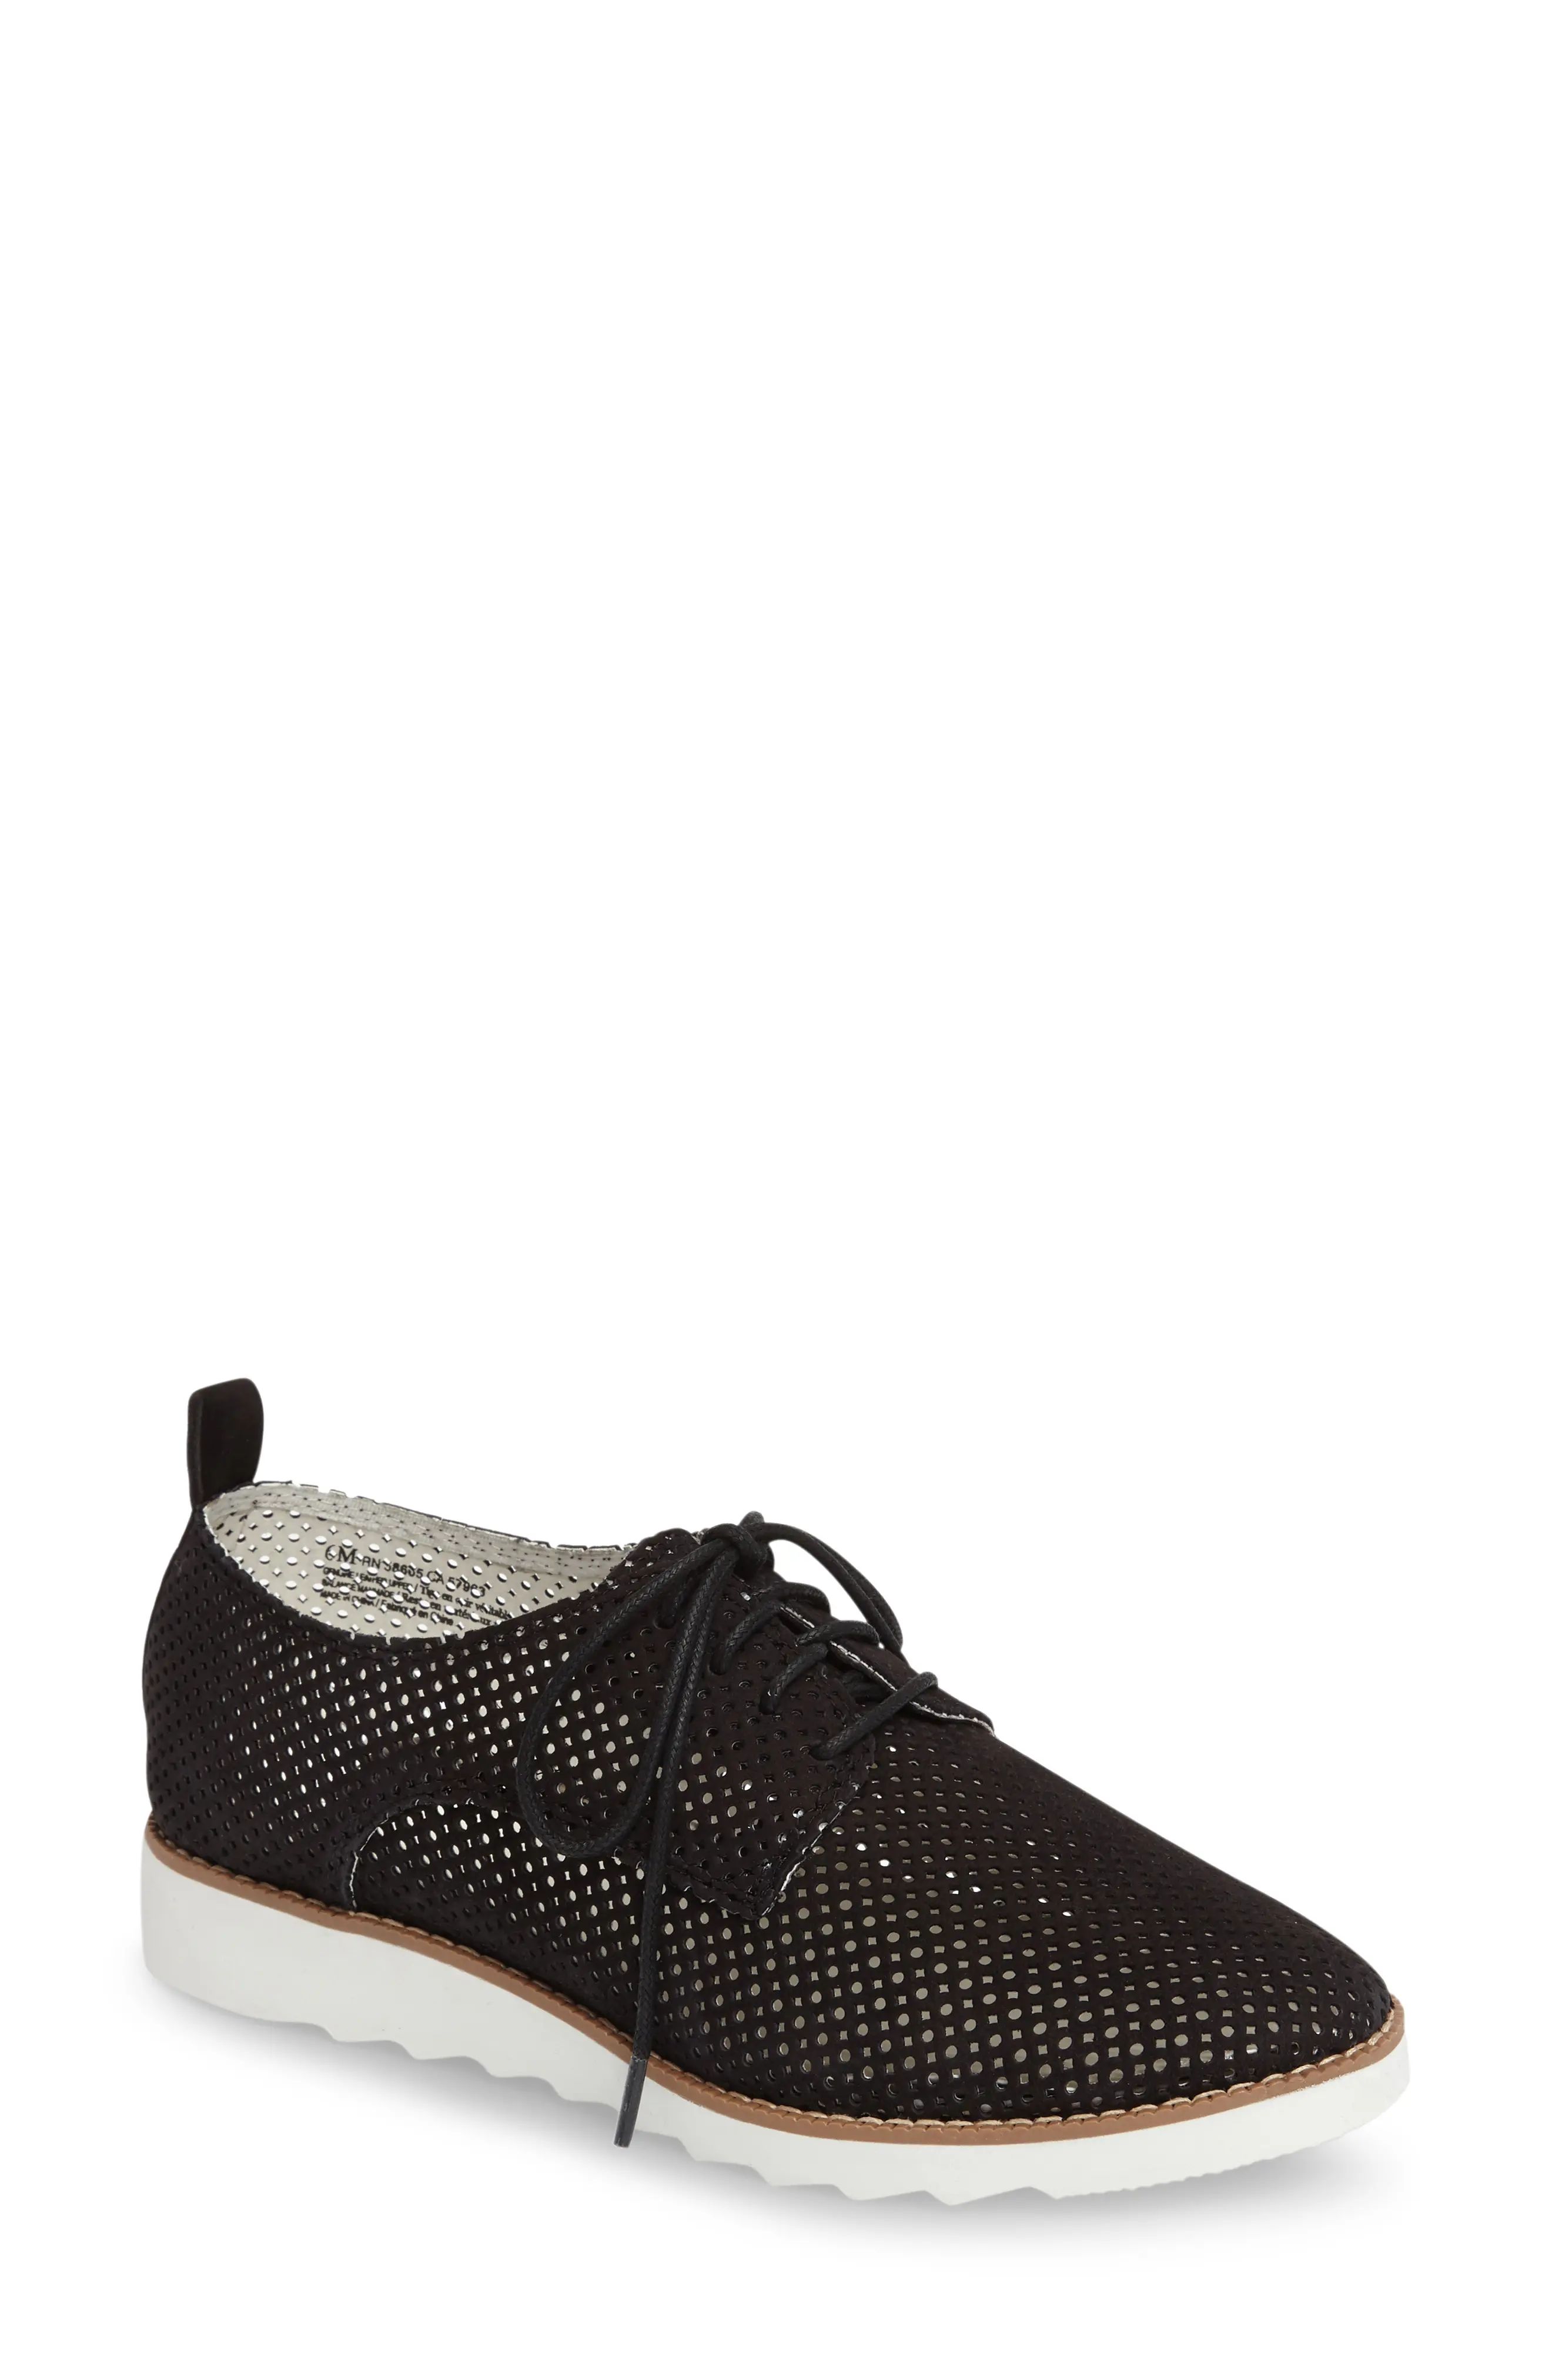 Eden Perforated Oxford | Nordstrom